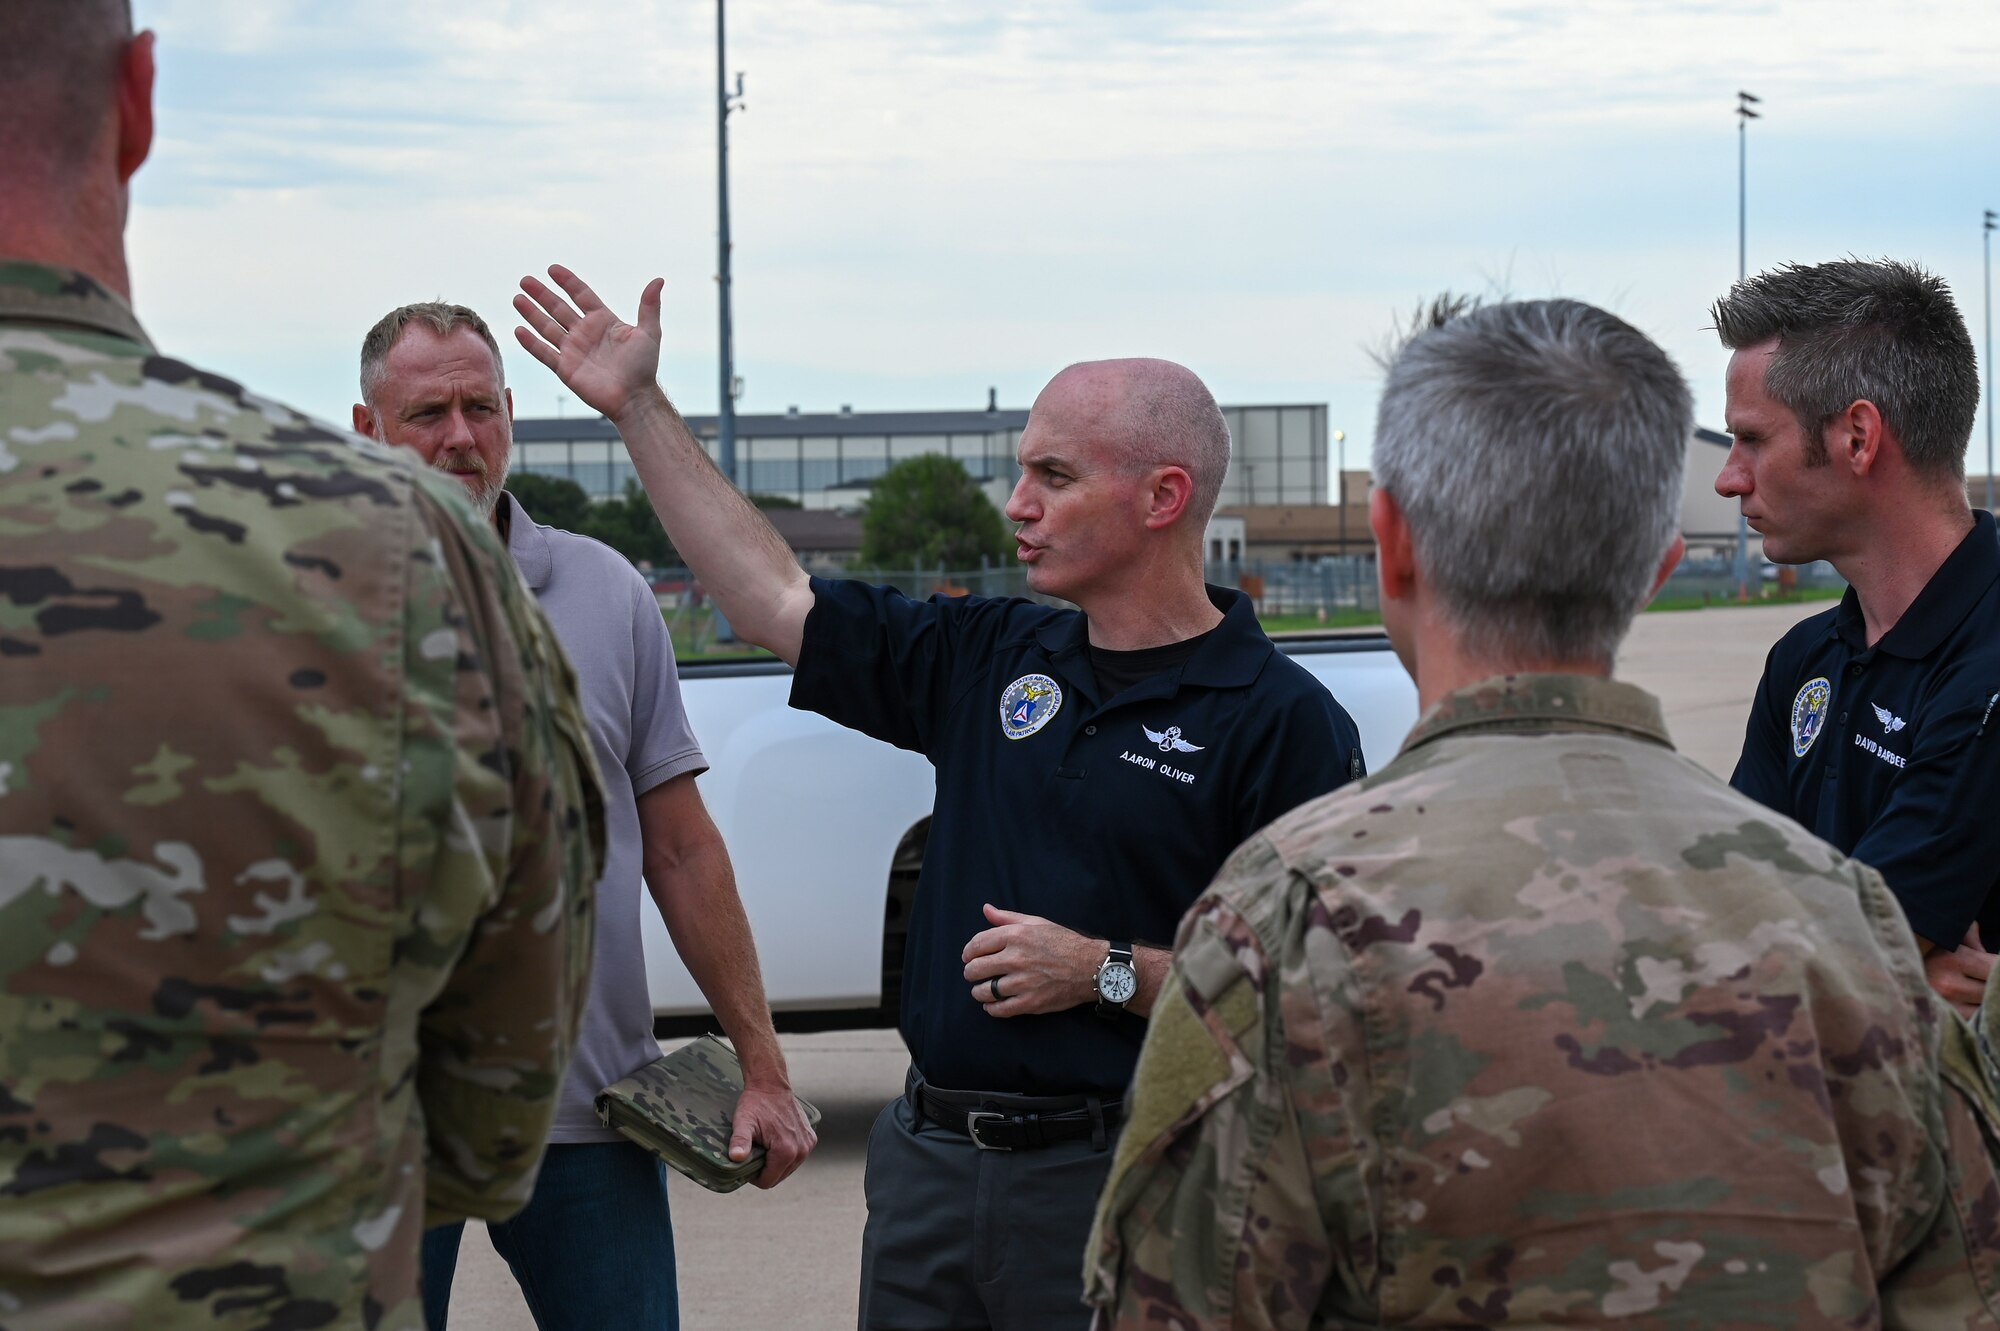 Col. Aaron Oliver, Oklahoma Wing Civil Air Patrol commander, talks about the logistics behind the delivery to attendees at Dyess Air Force Base, Texas, Sept. 21, 2023. This achievement highlights the dedication and innovative spirit of both civilian and military aviation entities, while also enhancing civil-military partnerships and highlighting an emerging capability within CAP as the Air Force Auxiliary. (U.S. Air Force photo by Senior Airman Sophia Robello)